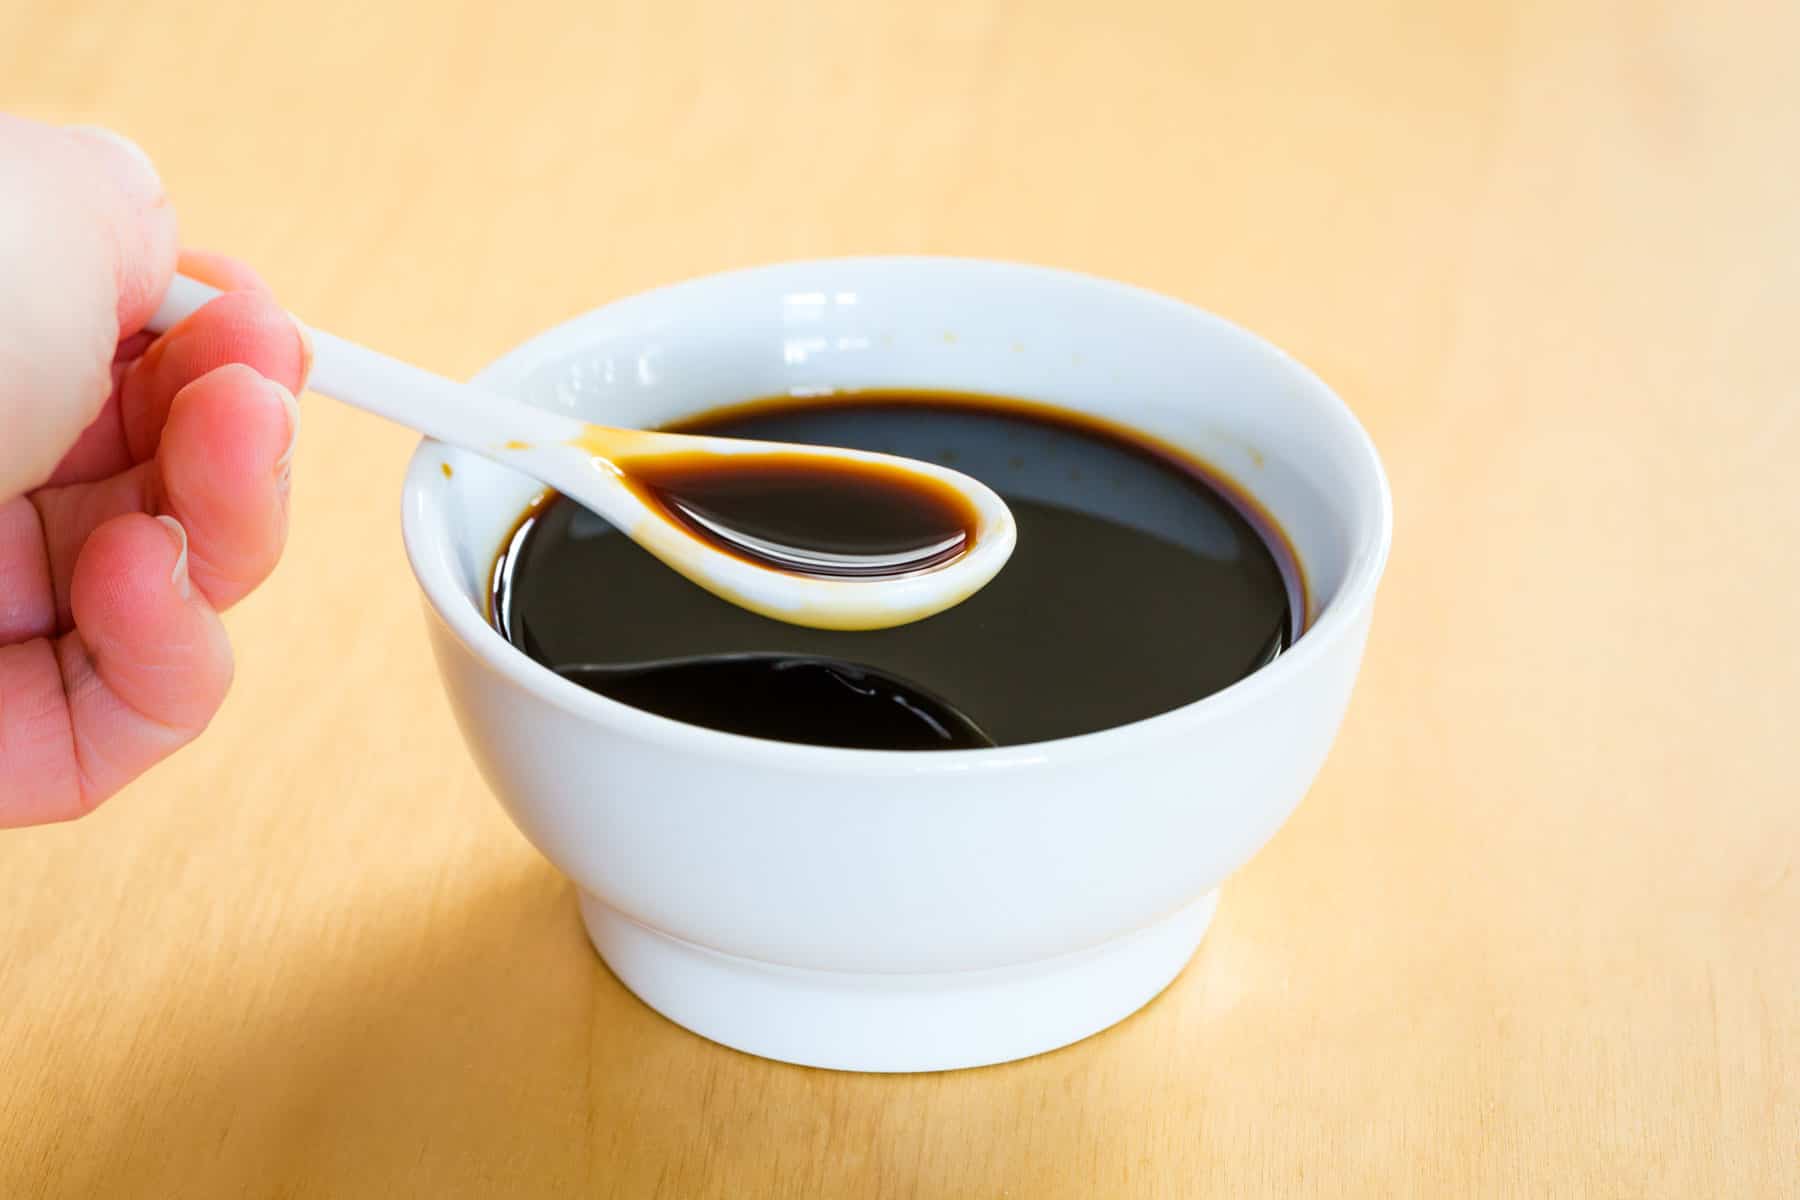 A hand holding a small white spoon of soy sauce over a bowl of soy sauce.